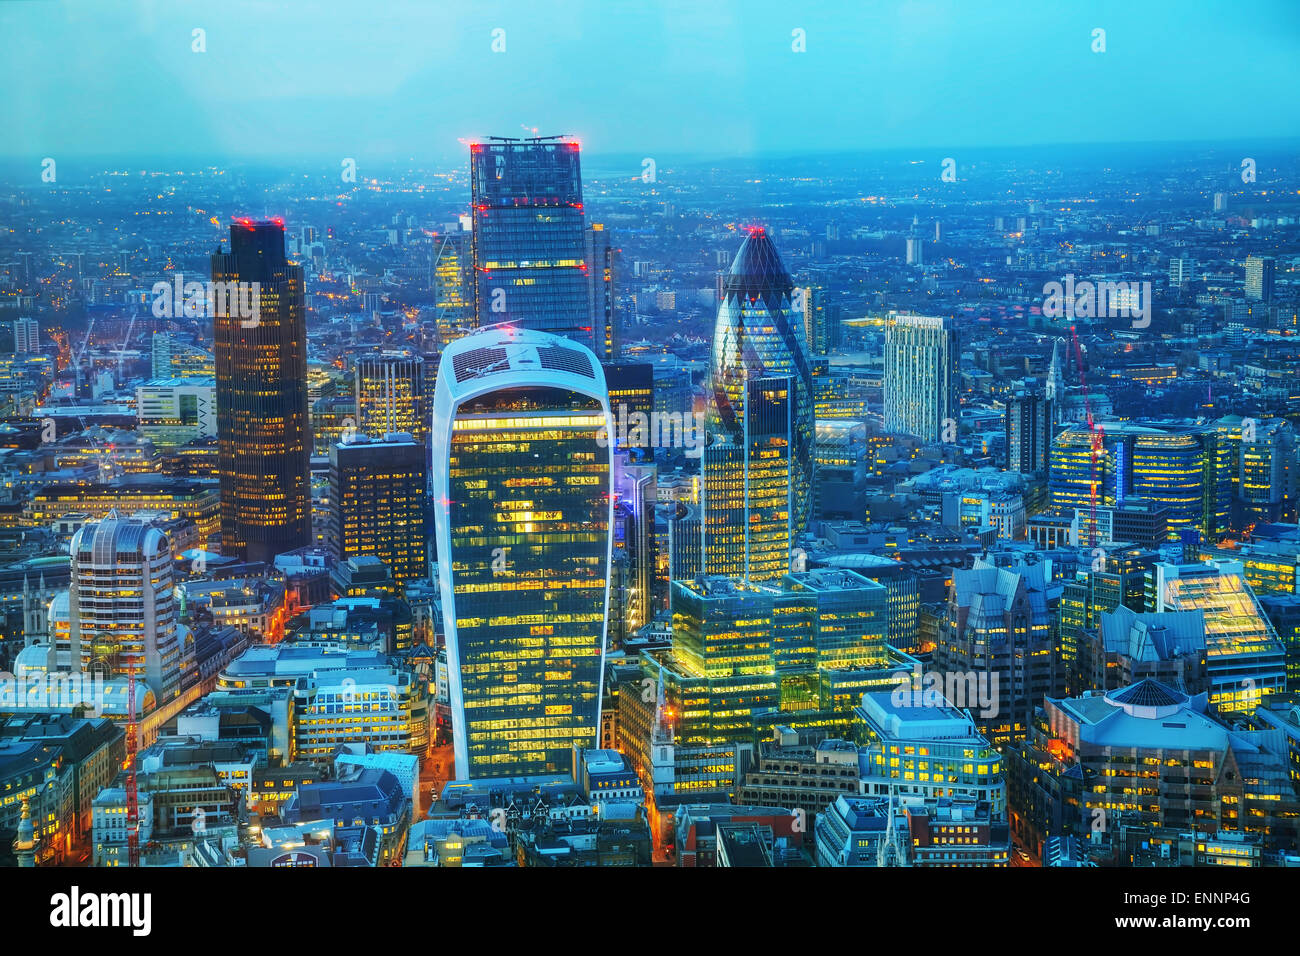 Aerial overview of the City of London financial ddistrict at night Stock Photo